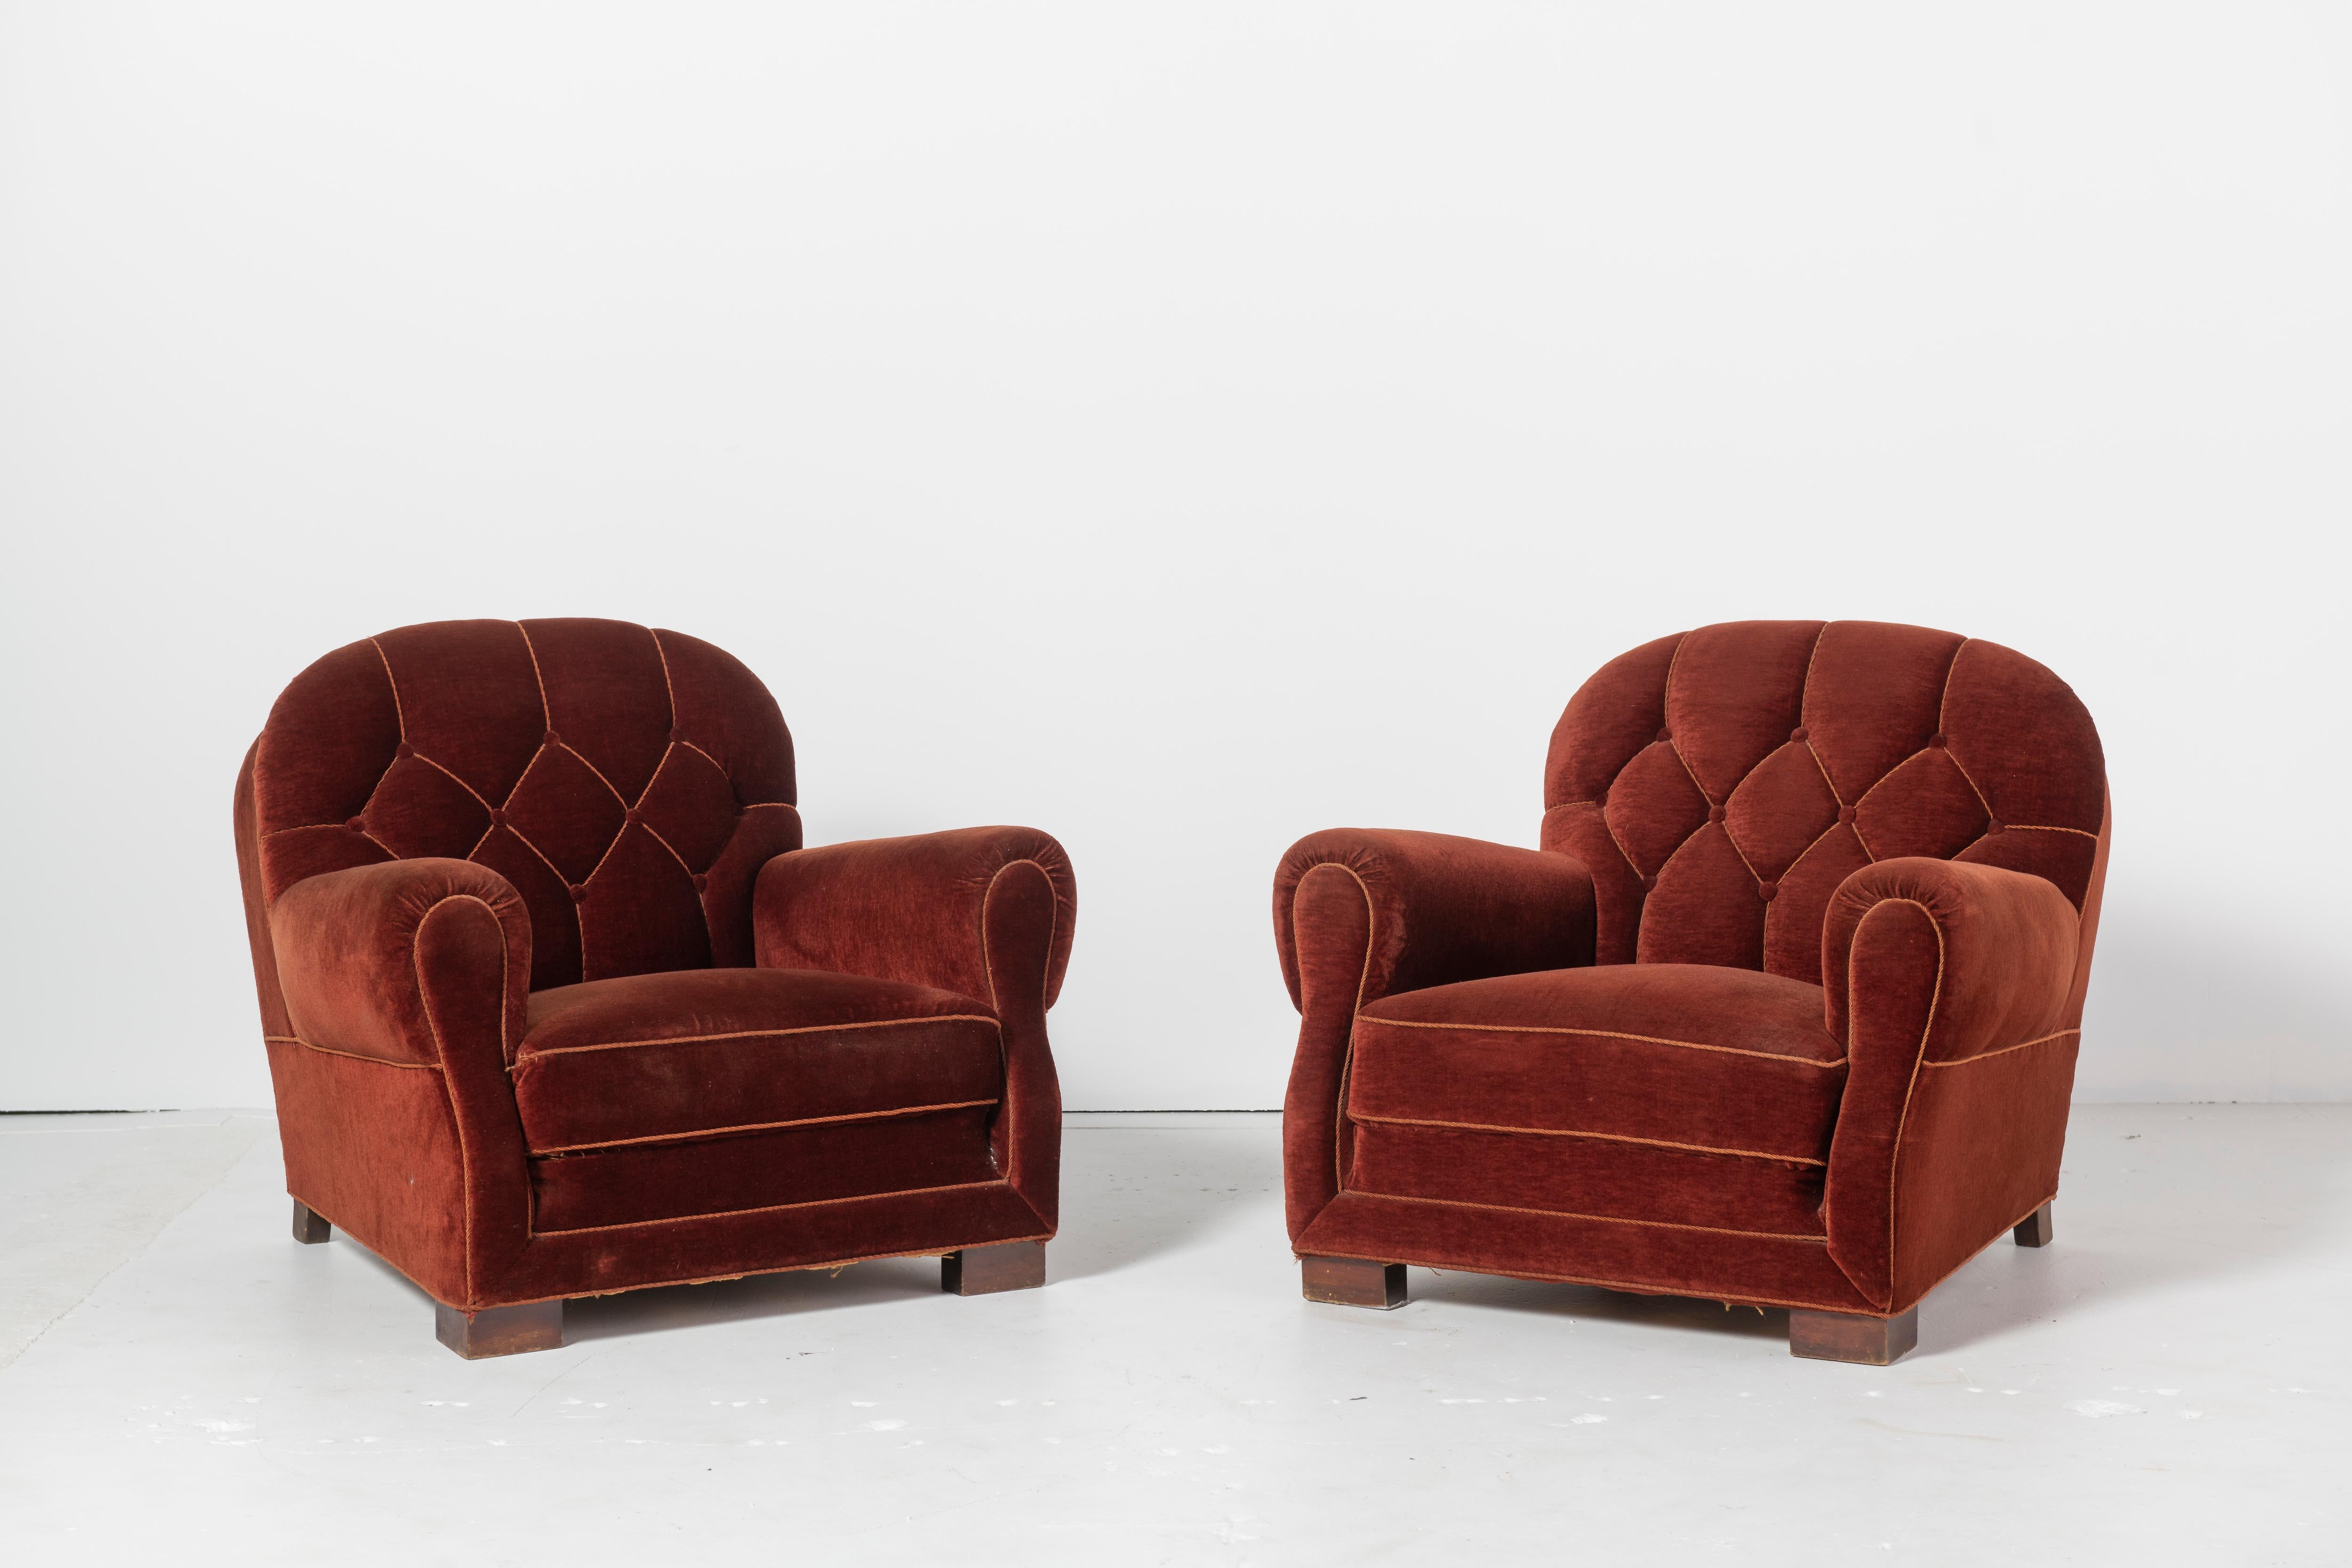 Pair of European, most likely Danish, vintage mohair club chairs in deep rust mohair with wheat-colored trim and piping.